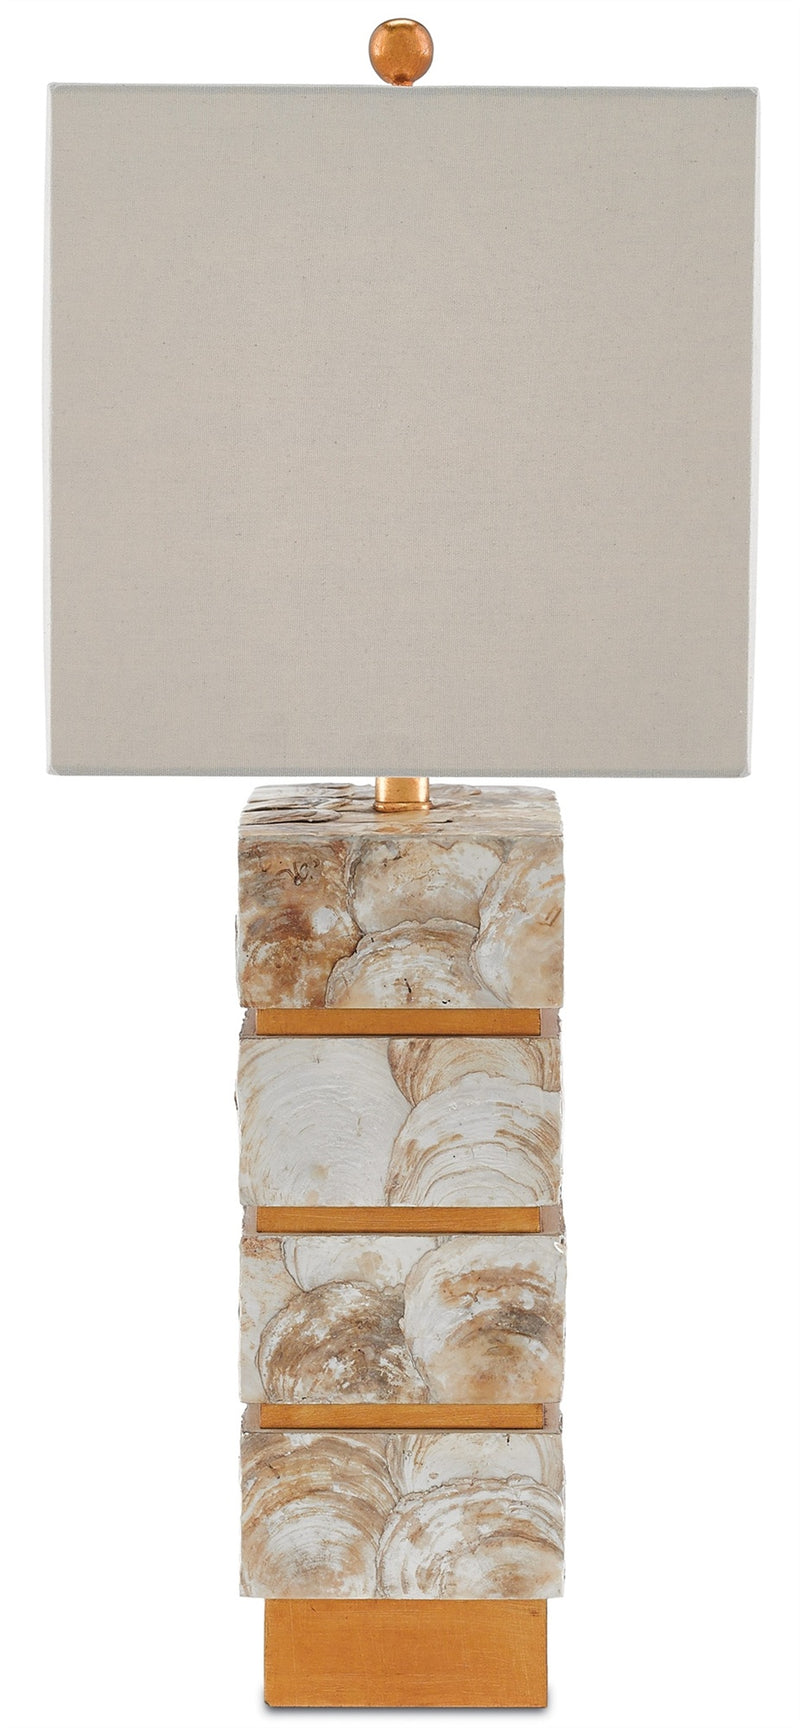 CORNERSTONE HOME INTERIORS - LIGHTING - CYCLADES TABLE LAMP